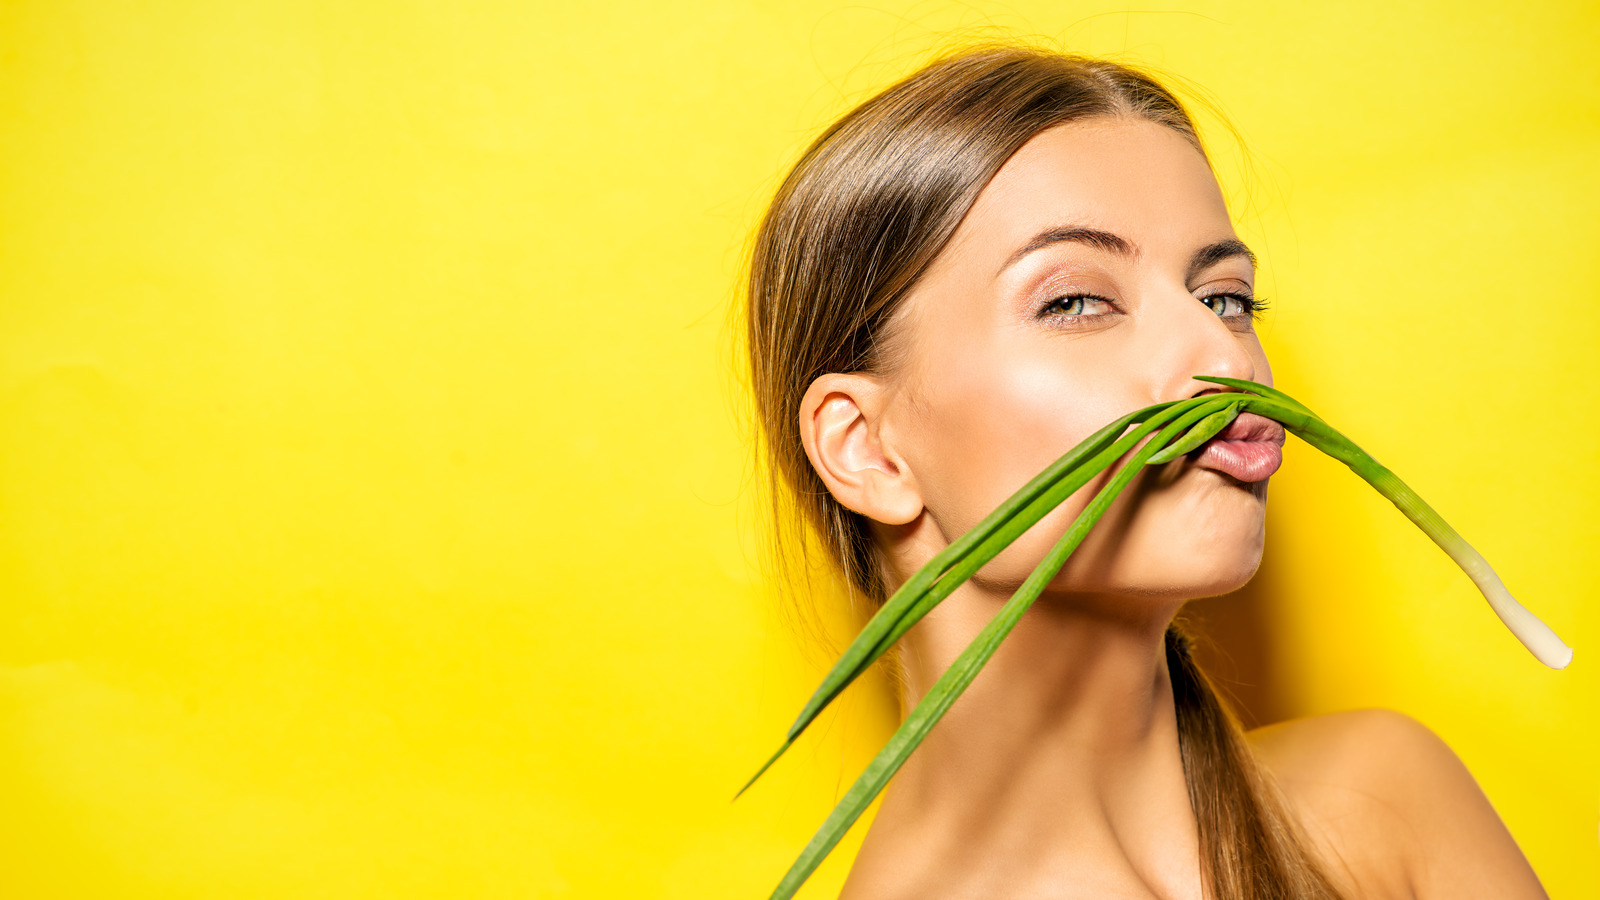 The Unexpected Benefits of Adding Onion to Your Skin Care Routine